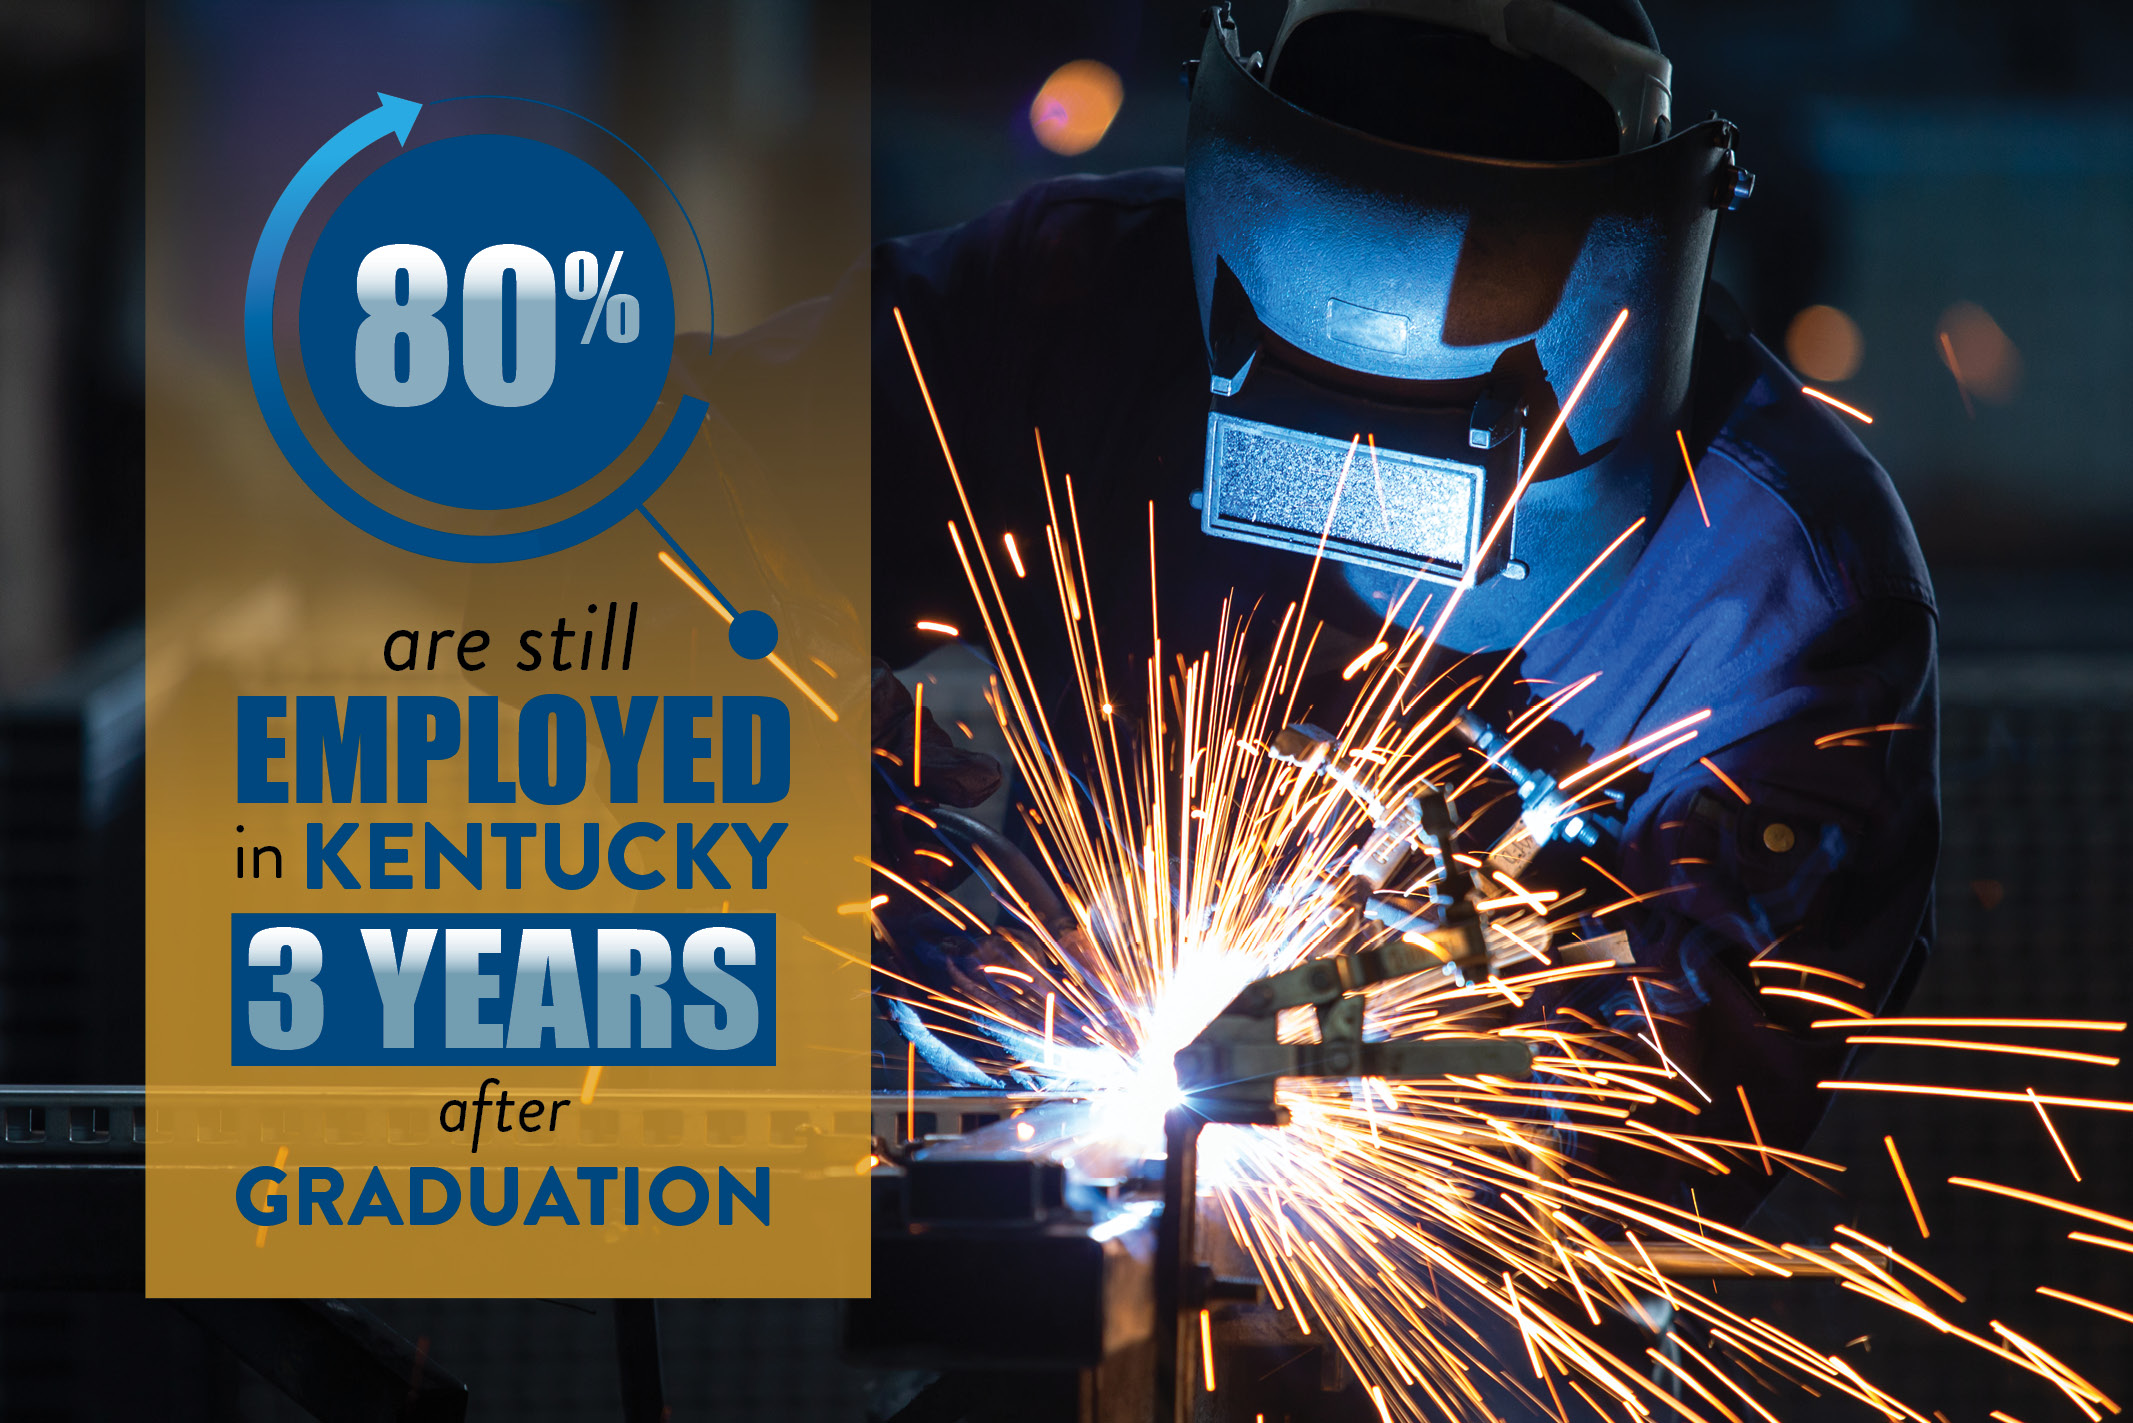 Welding Student, 80% of SKYCTC students are still employed in Kentucky 3 years after graduation.